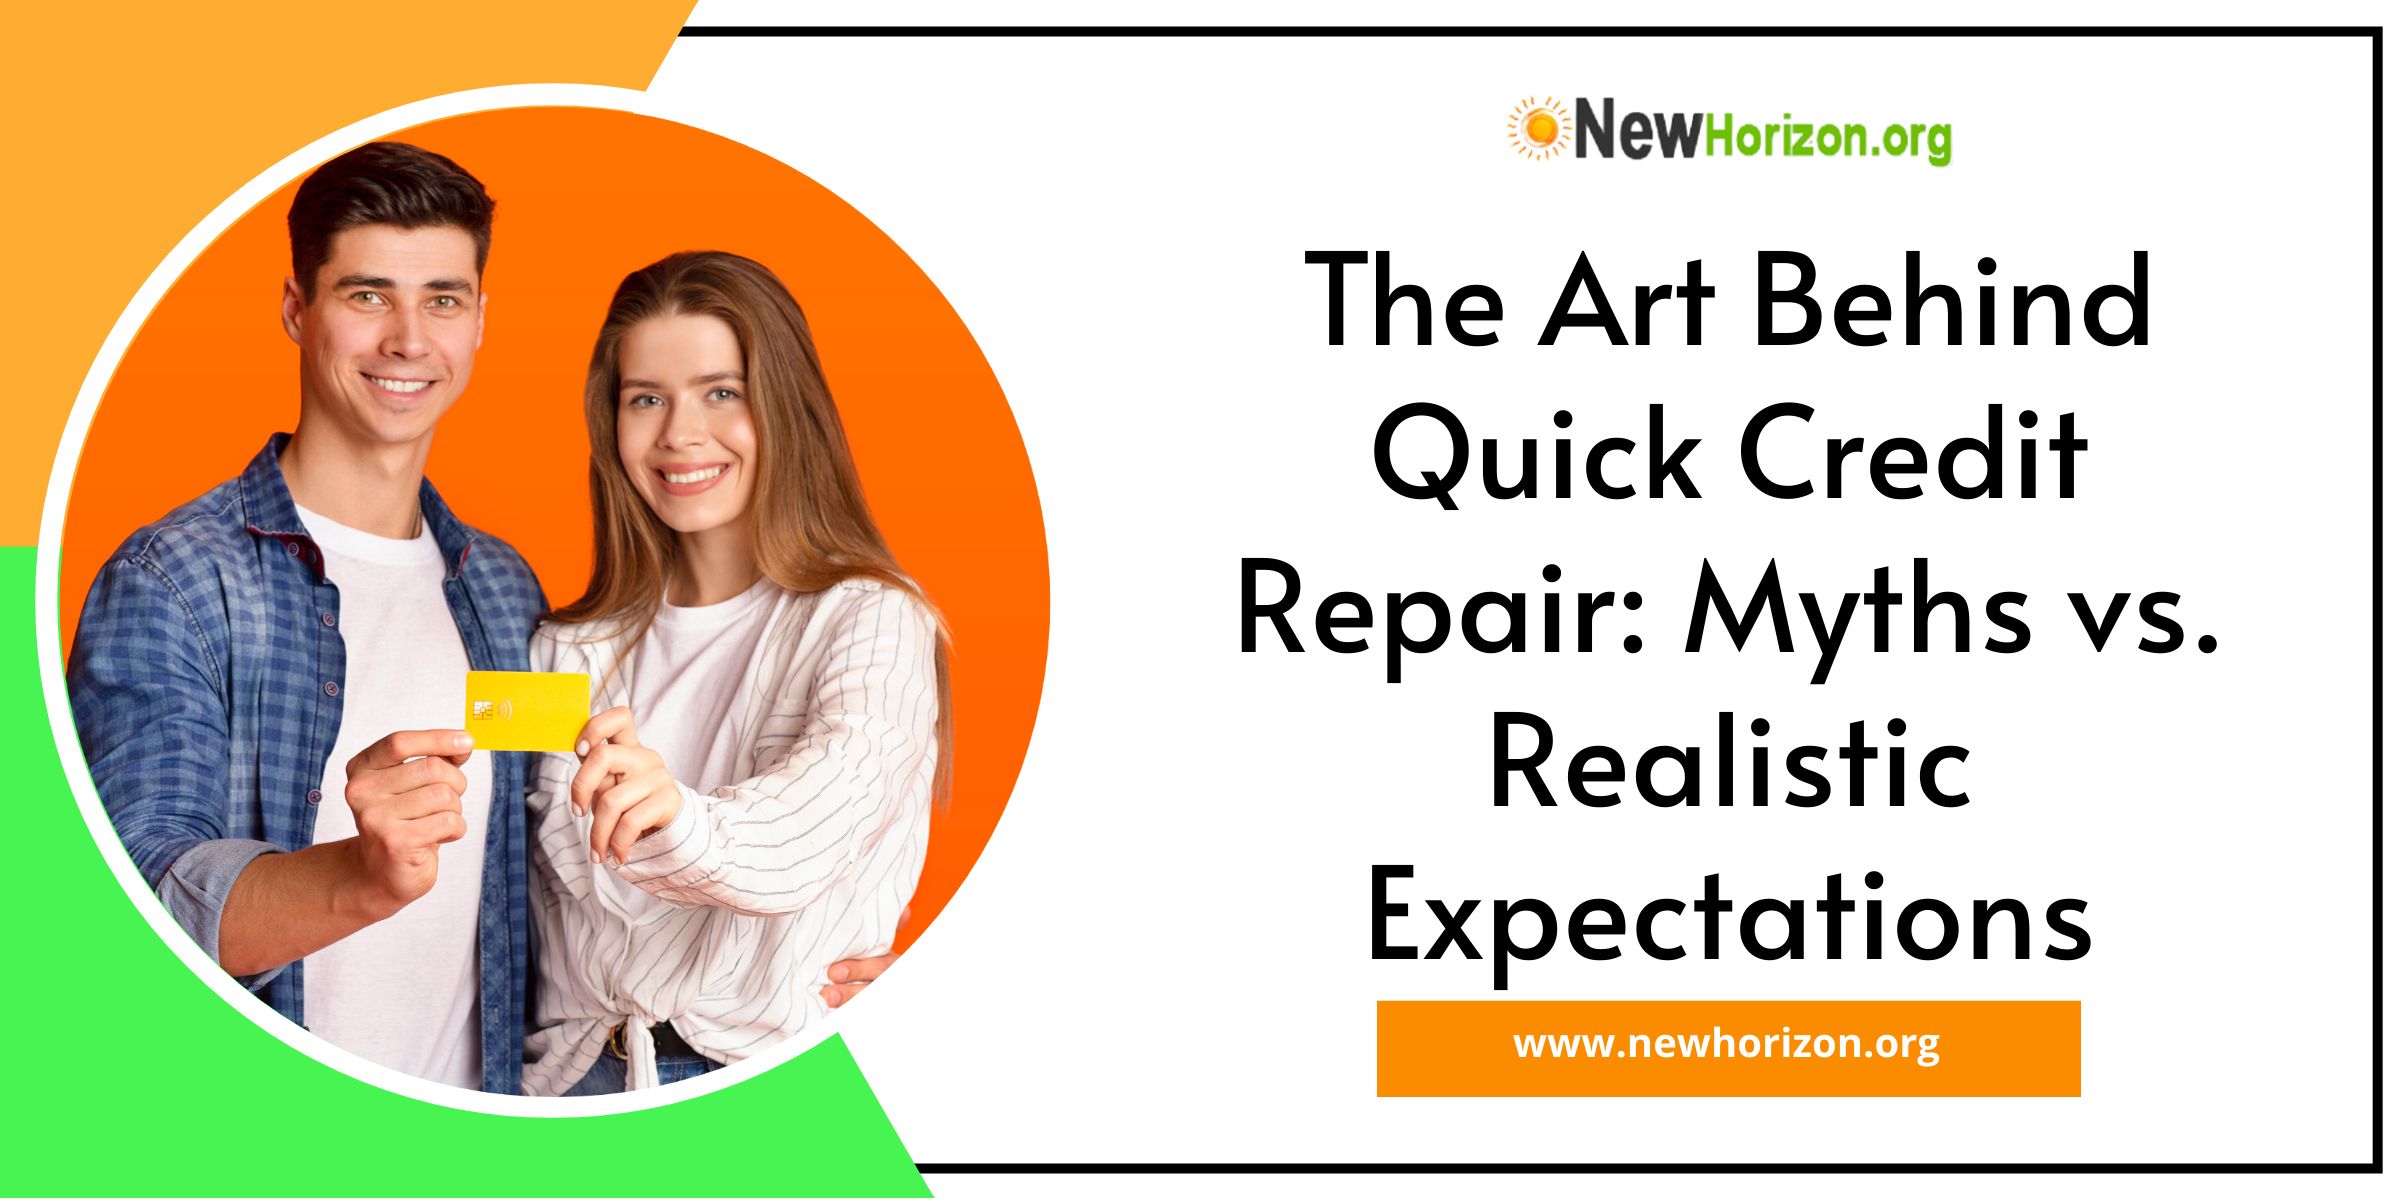 The Art Behind Quick Credit Repair: Myths vs. Realistic Expectations